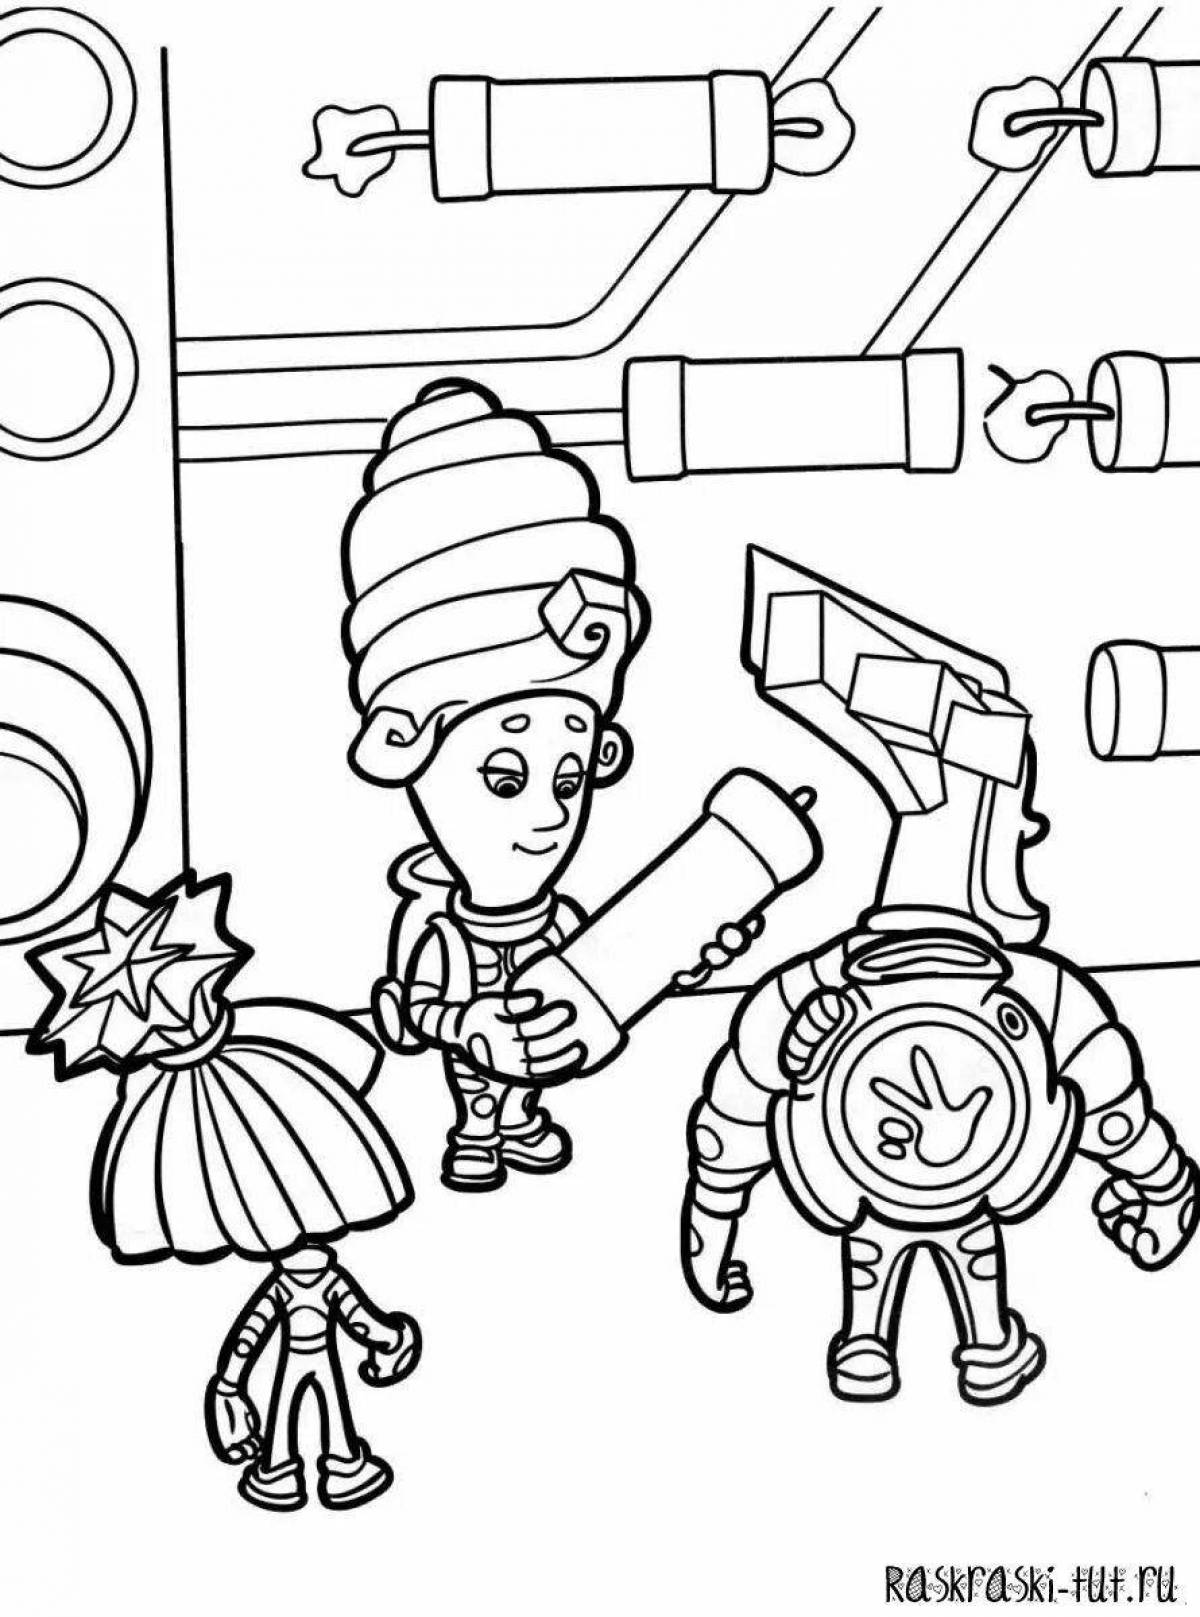 Fantastic fixies coloring pages